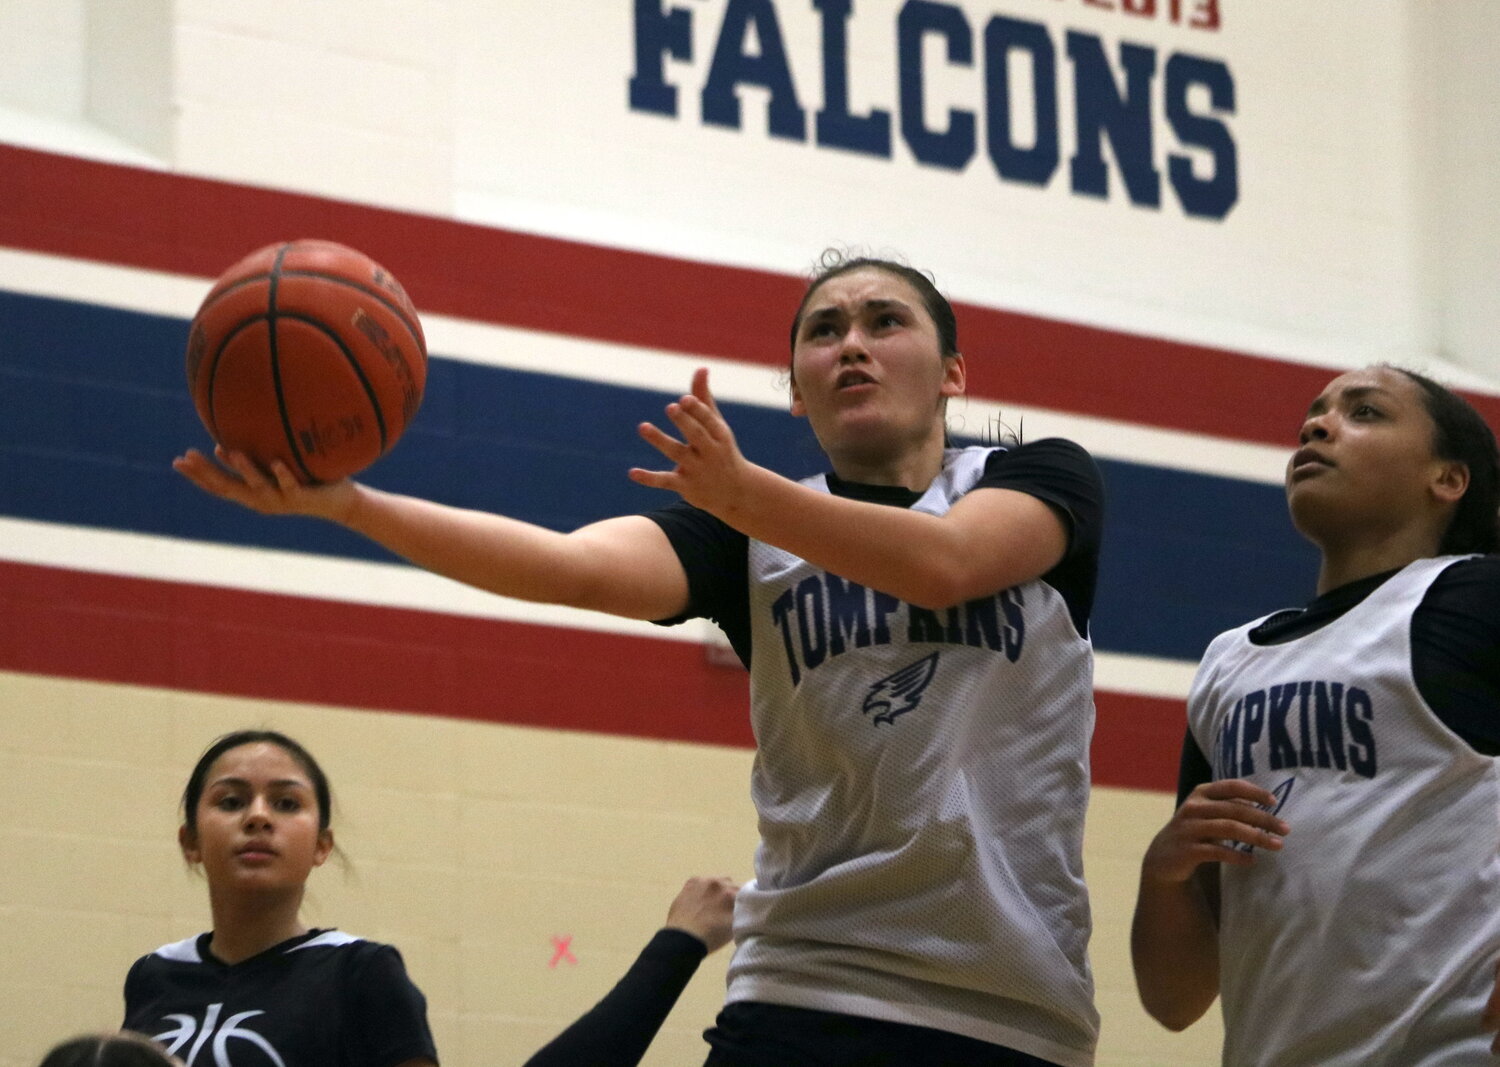 Rihanna DeLeon shoots a layup during Thursday's game between Tompkins and Laredo United South defenders at the Tompkins gym.